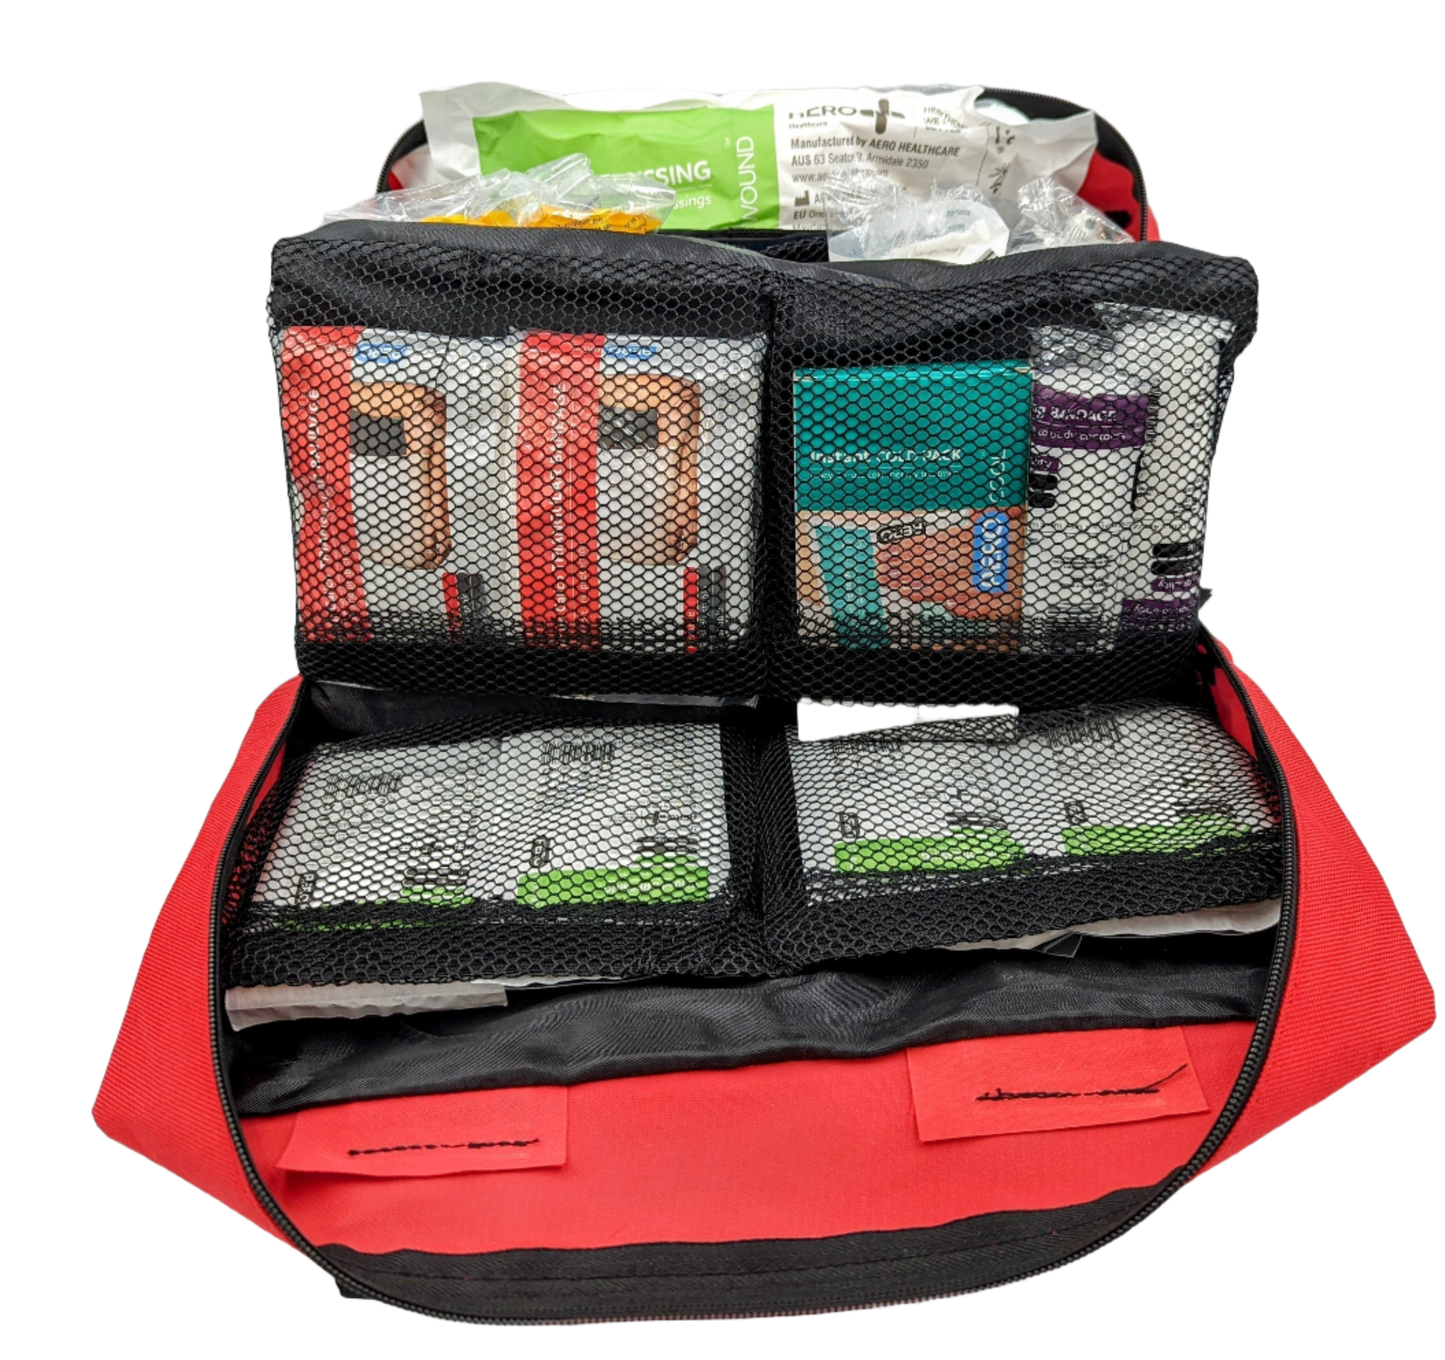 NSW Police Operational Vehicle First Aid Kit-First Aid Kit-Assurance Training and Sales-Assurance Training and Sales